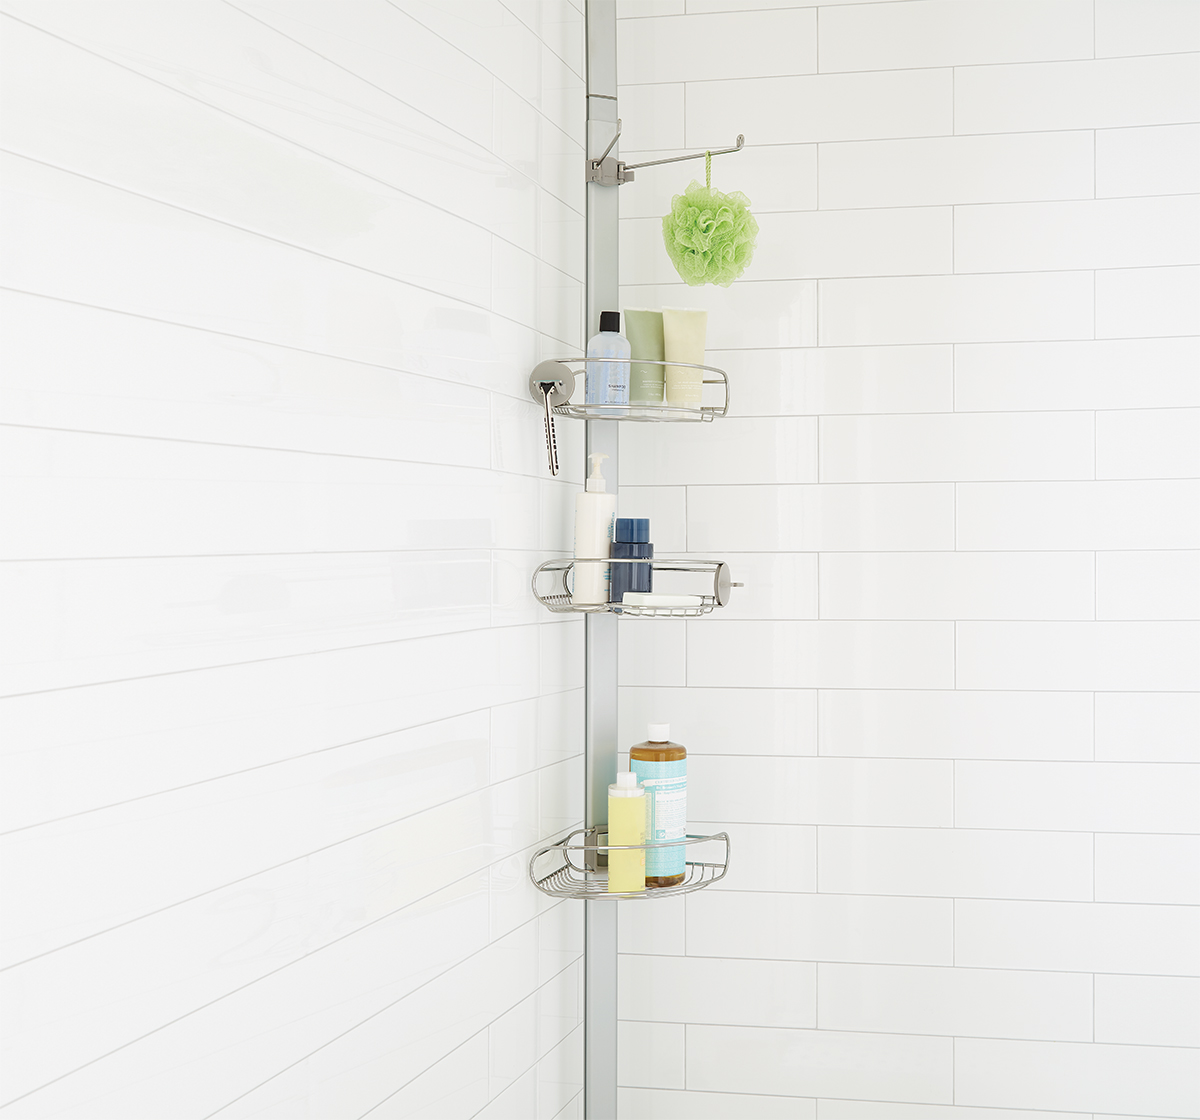 https://www.containerstore.com/catalogimages/324622/CF_17-10049748-Tension-Pole-Shower-C.jpg